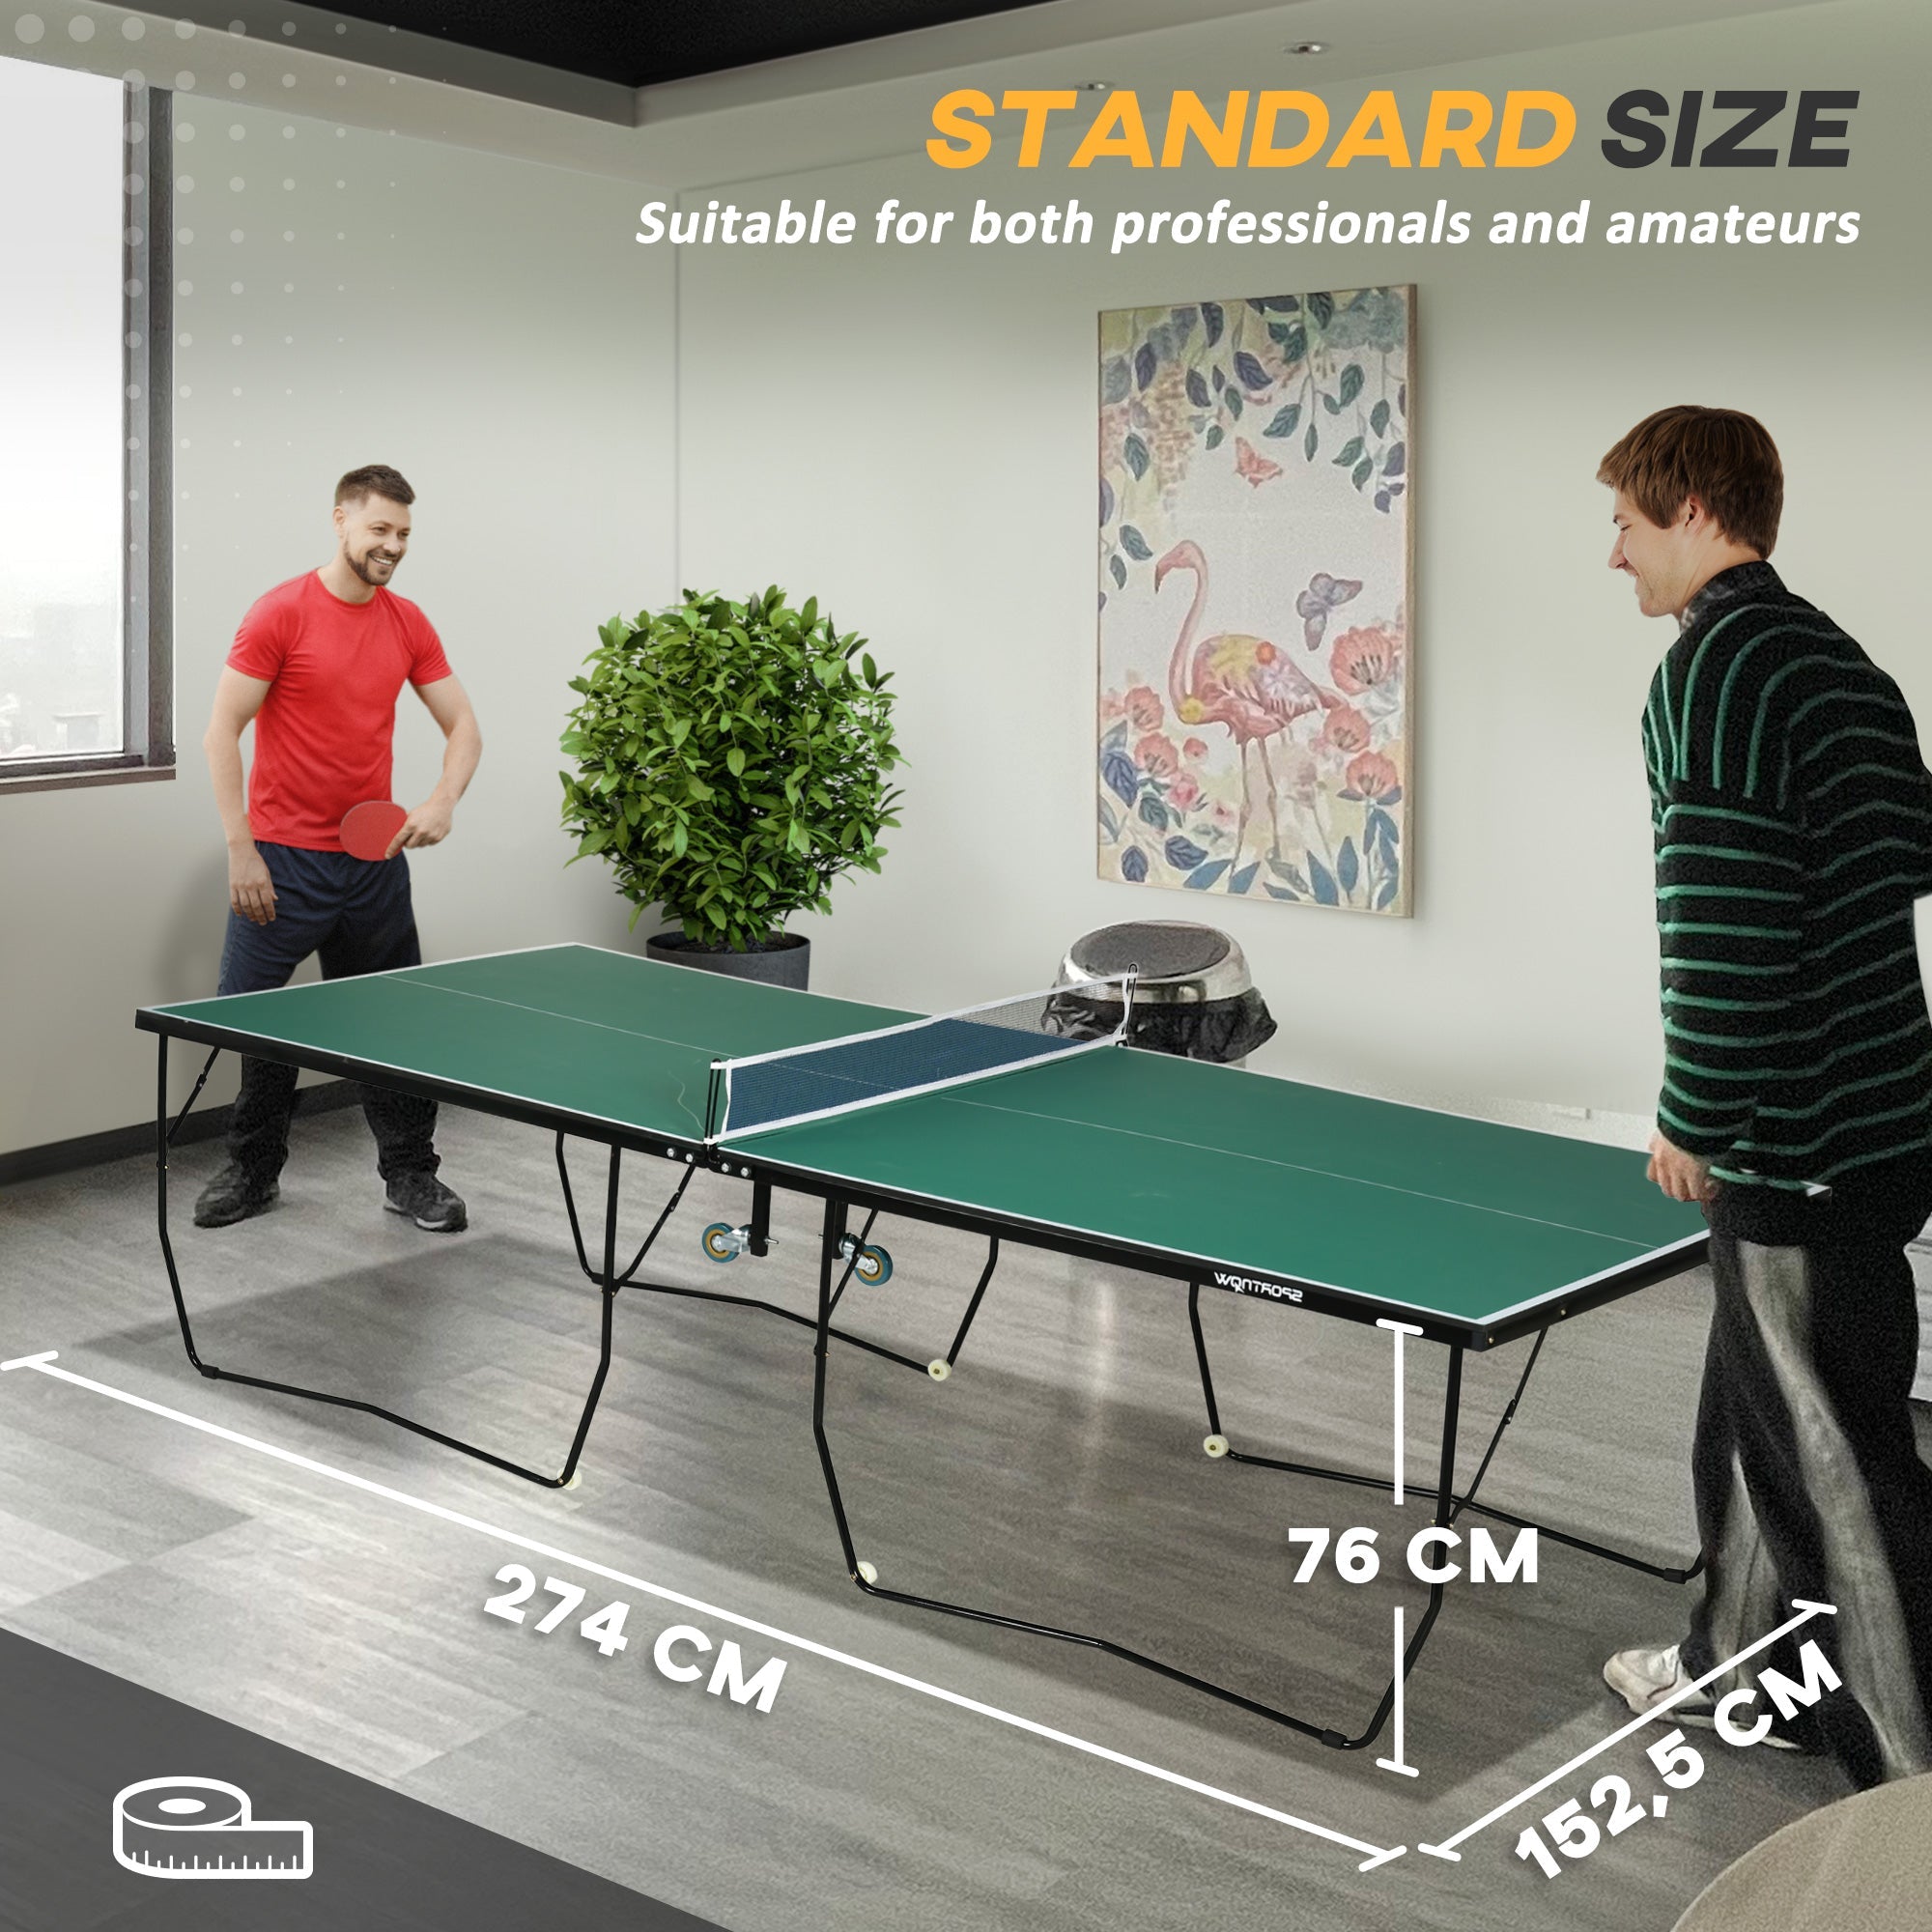 9FT Outdoor Folding Table, Tennis Table, with 8 Wheels, for Indoor and Outdoor Use - Green-3